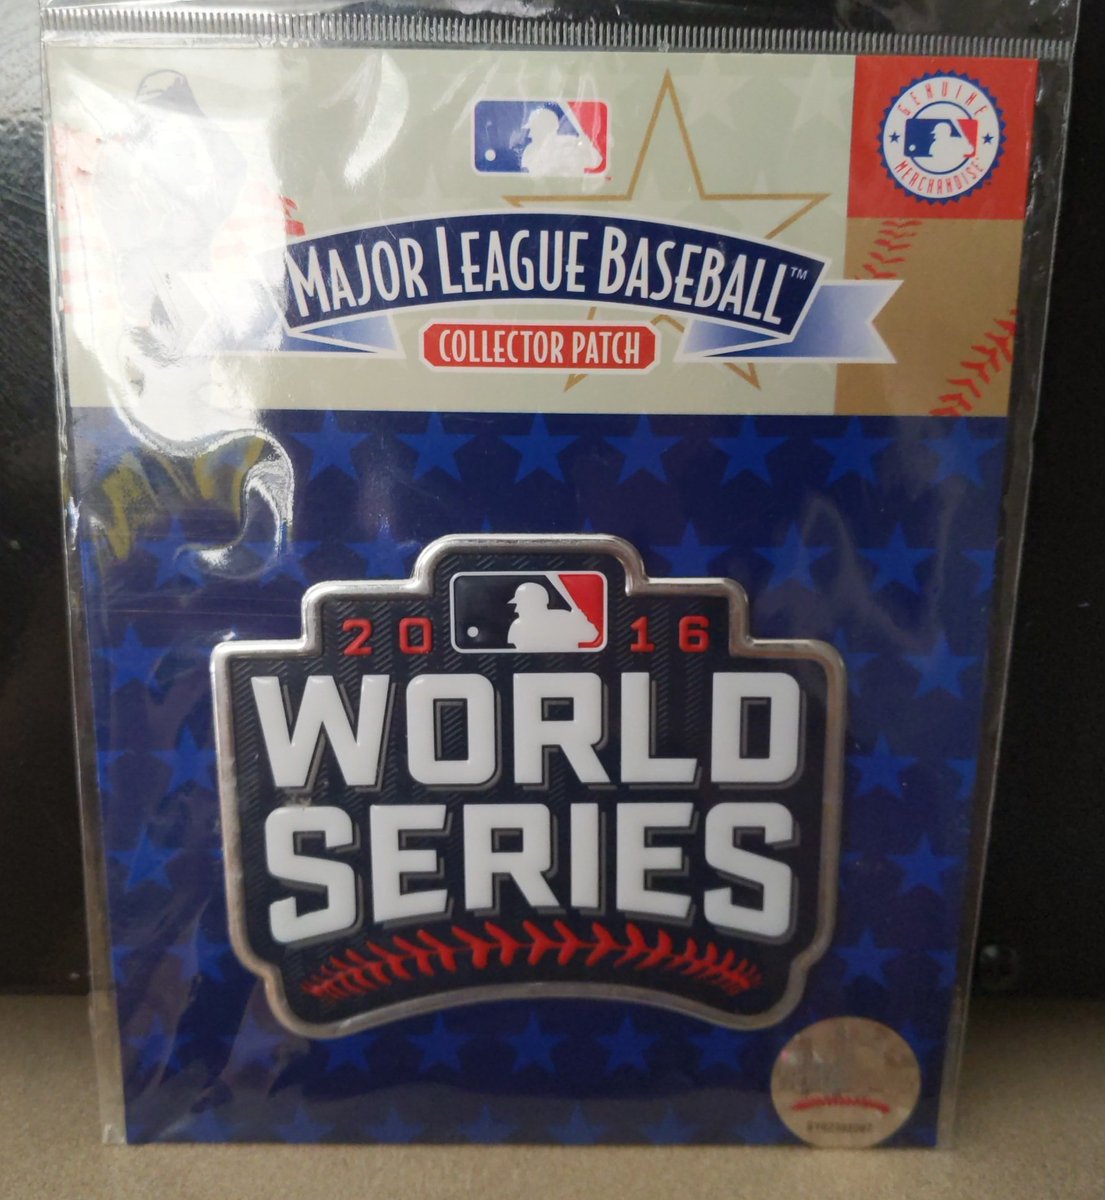 Official 2016 World Series patch from Cubs World Series winning season. Still in packaging never taken out. Would greatly appreciate any RT. Everything in this thread is for sale. DM me for prices..  #Cubs  @cubs  @WatchTheBreaks  @crawlyscubs  @BarstoolBigCat  @NBCSCubs  @ChiefCub